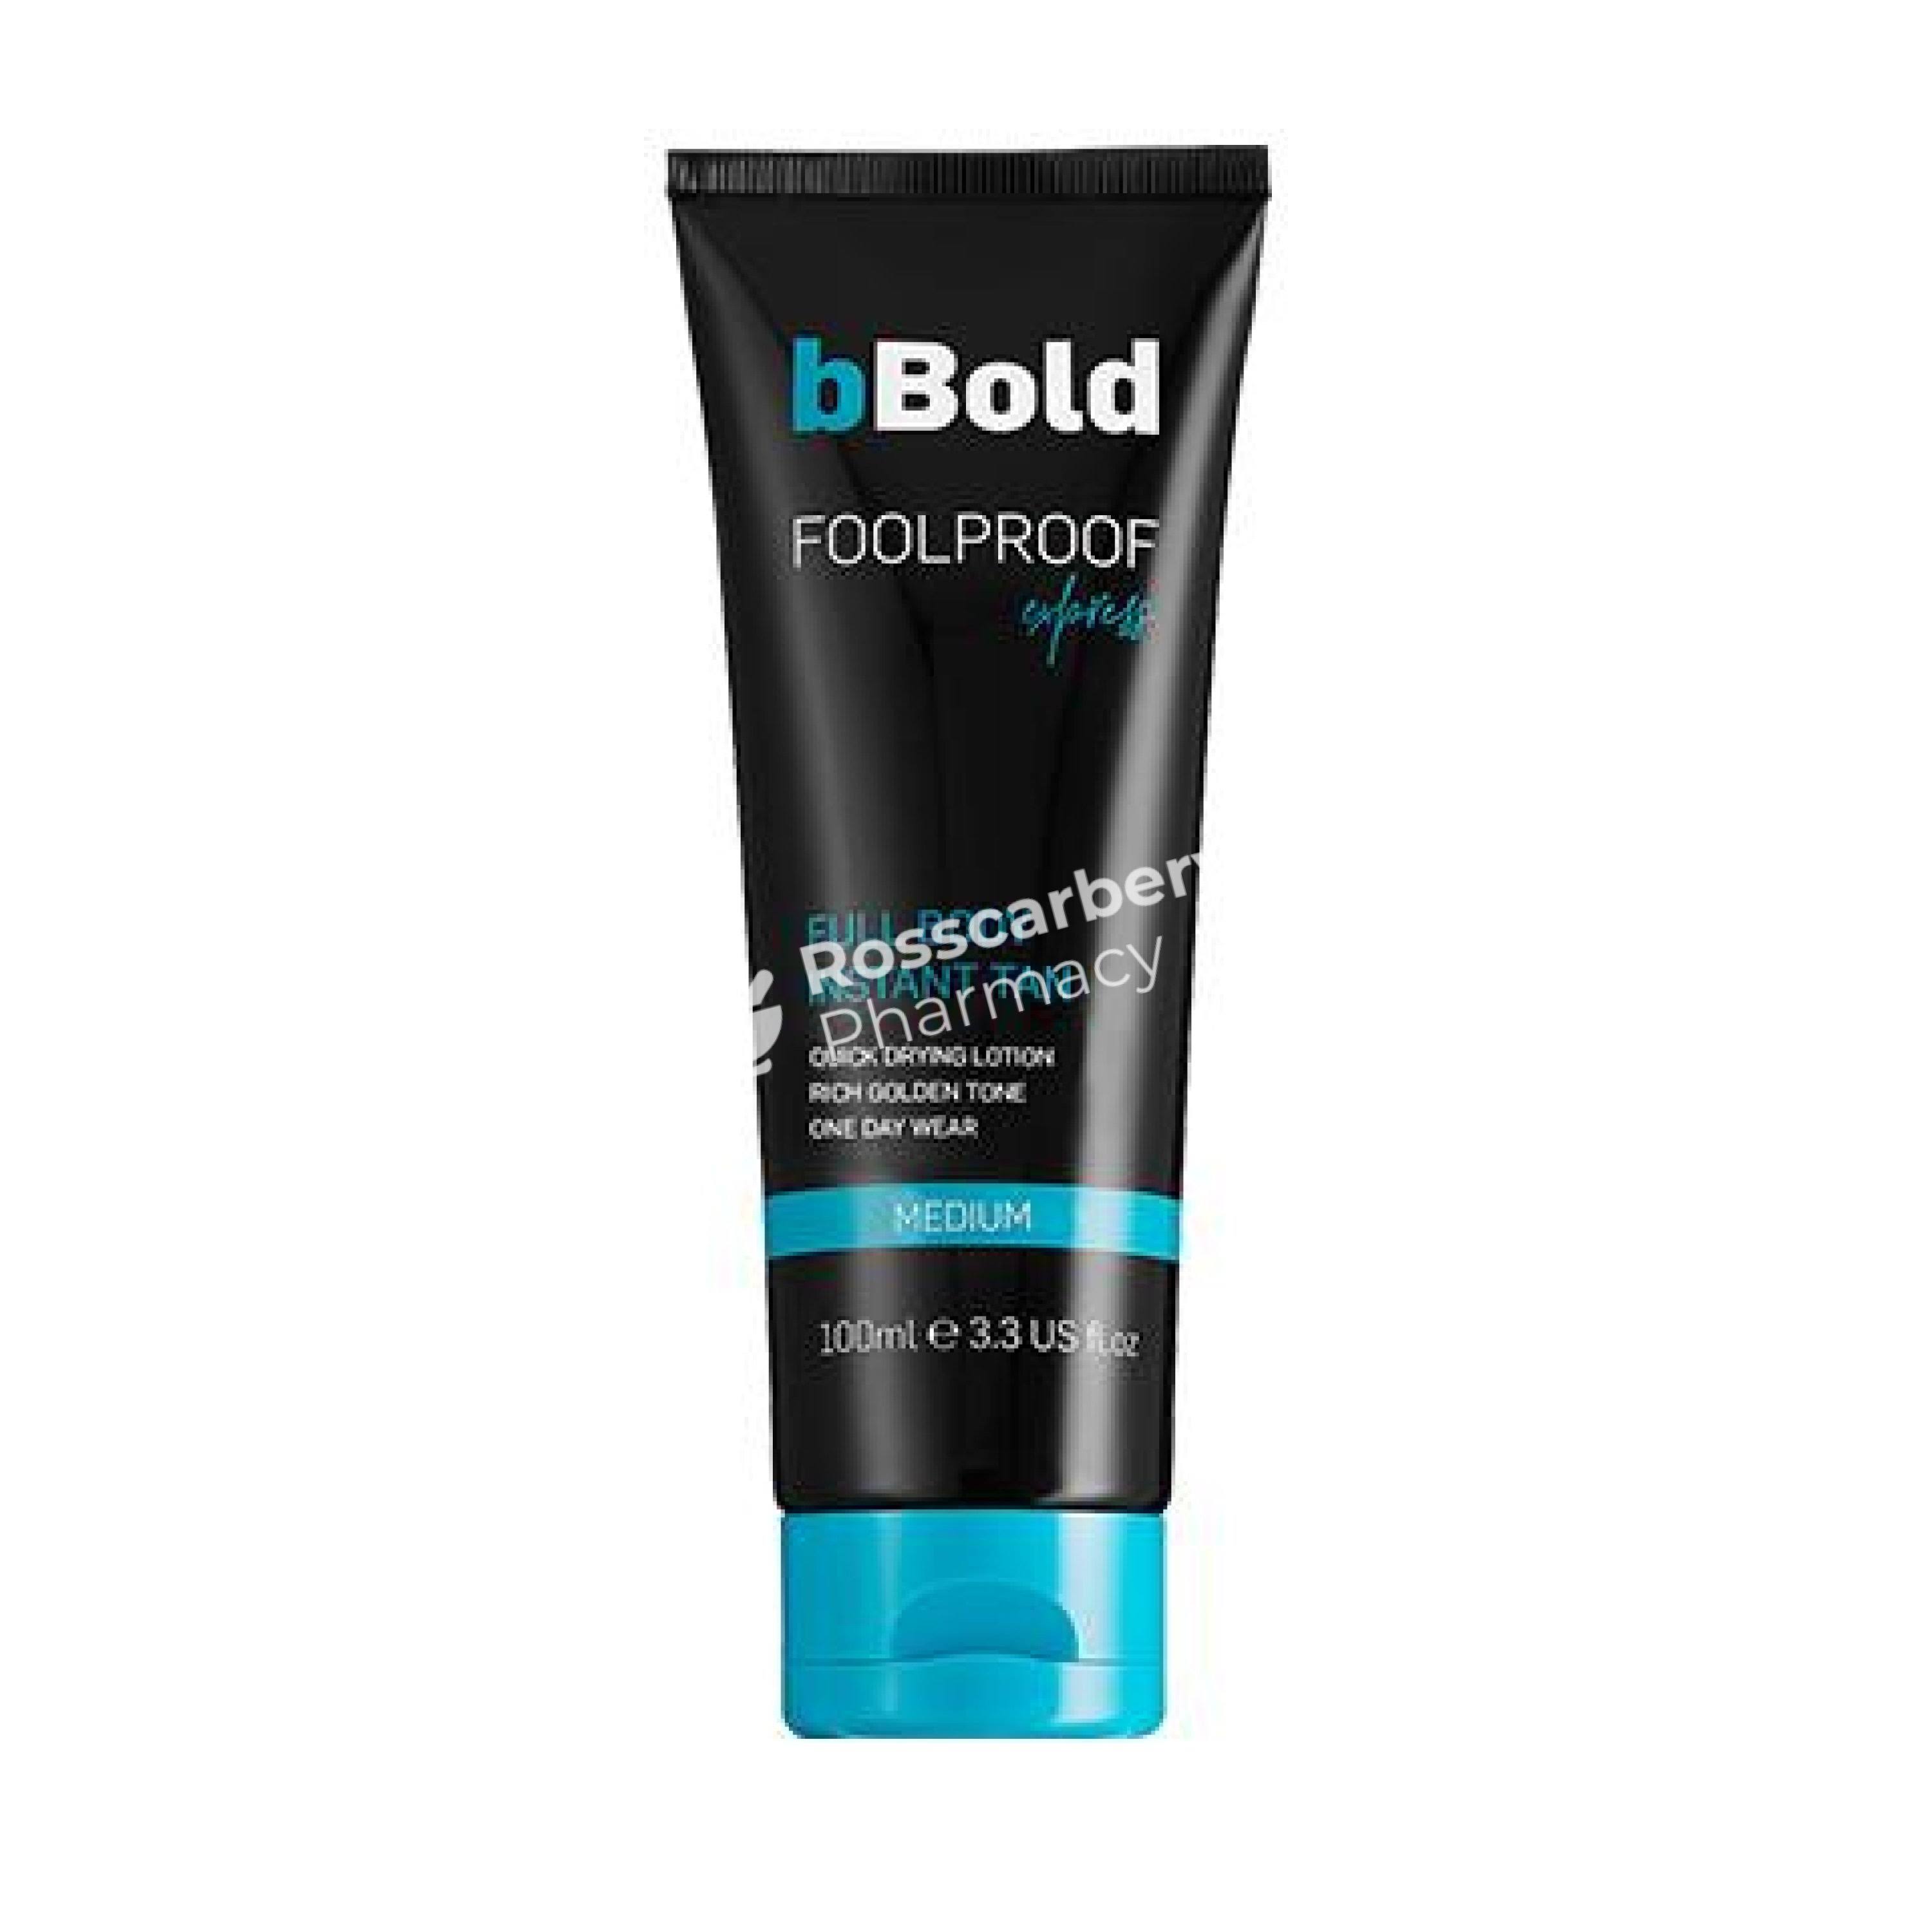 BBold Foolproof Express Lotion 100ml | Skin Care